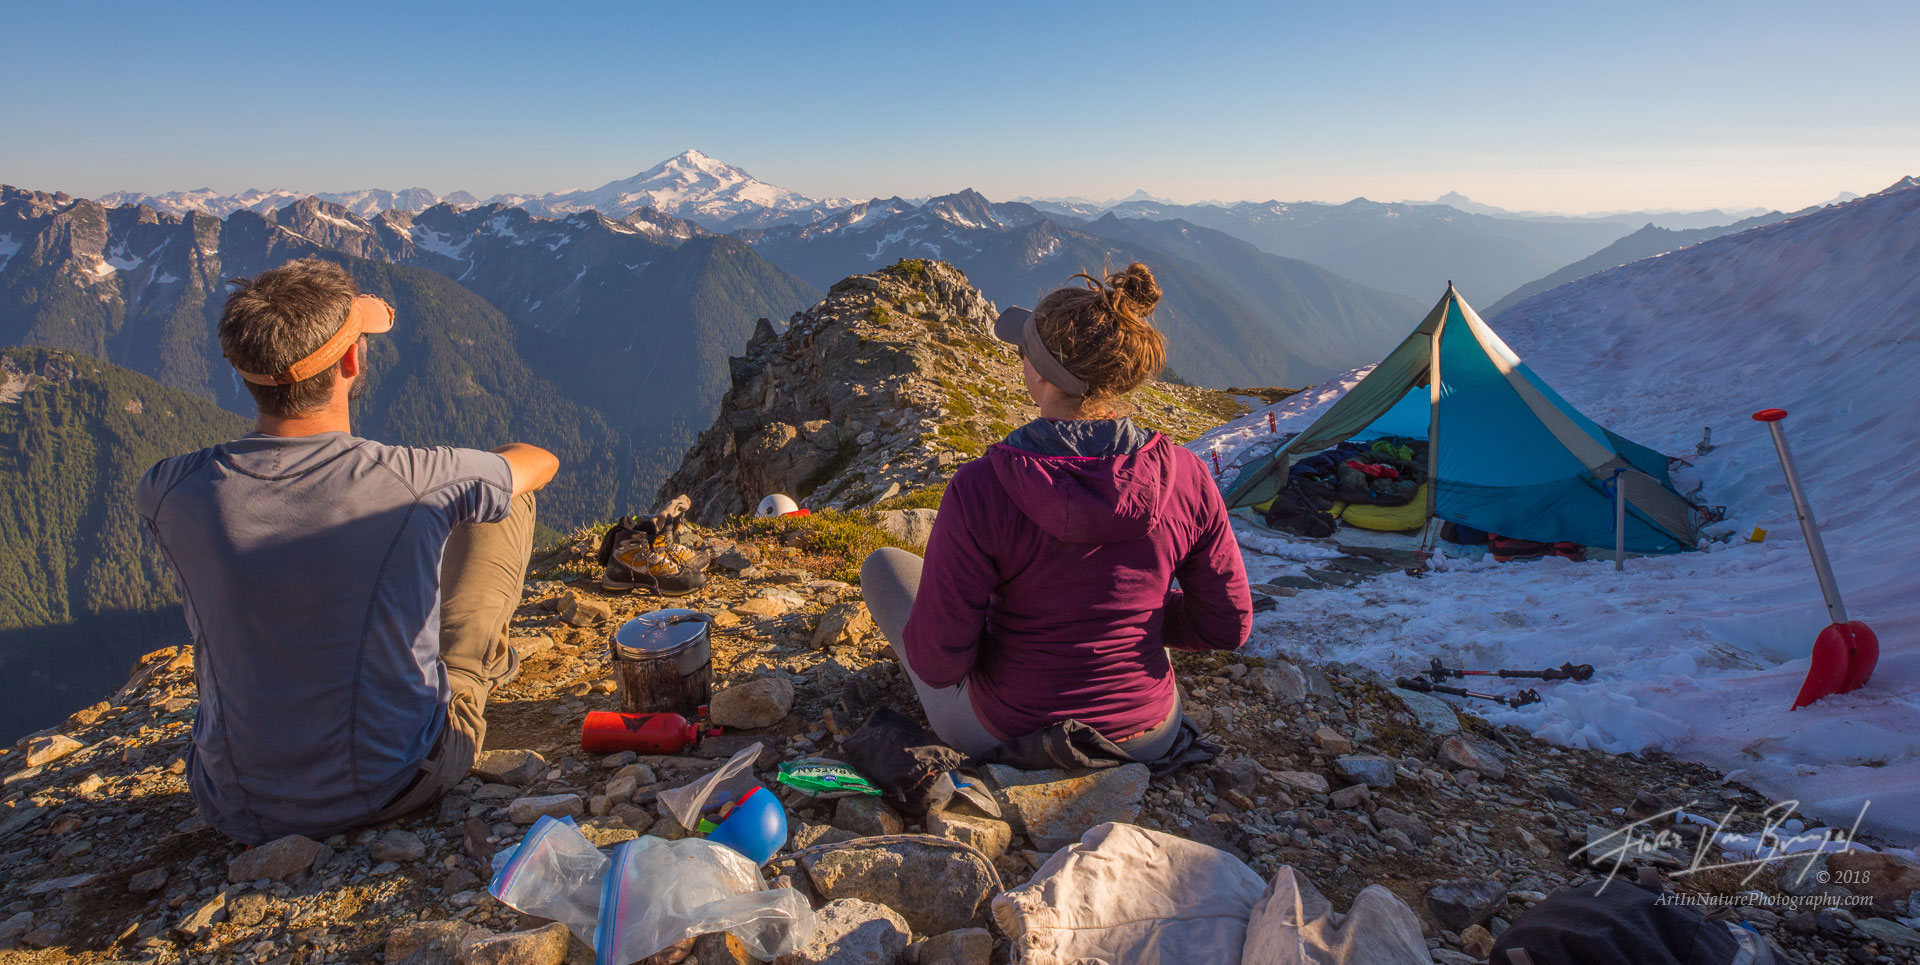 Dinner time on Itswoot Ridge, with a view of Glacier Peak.